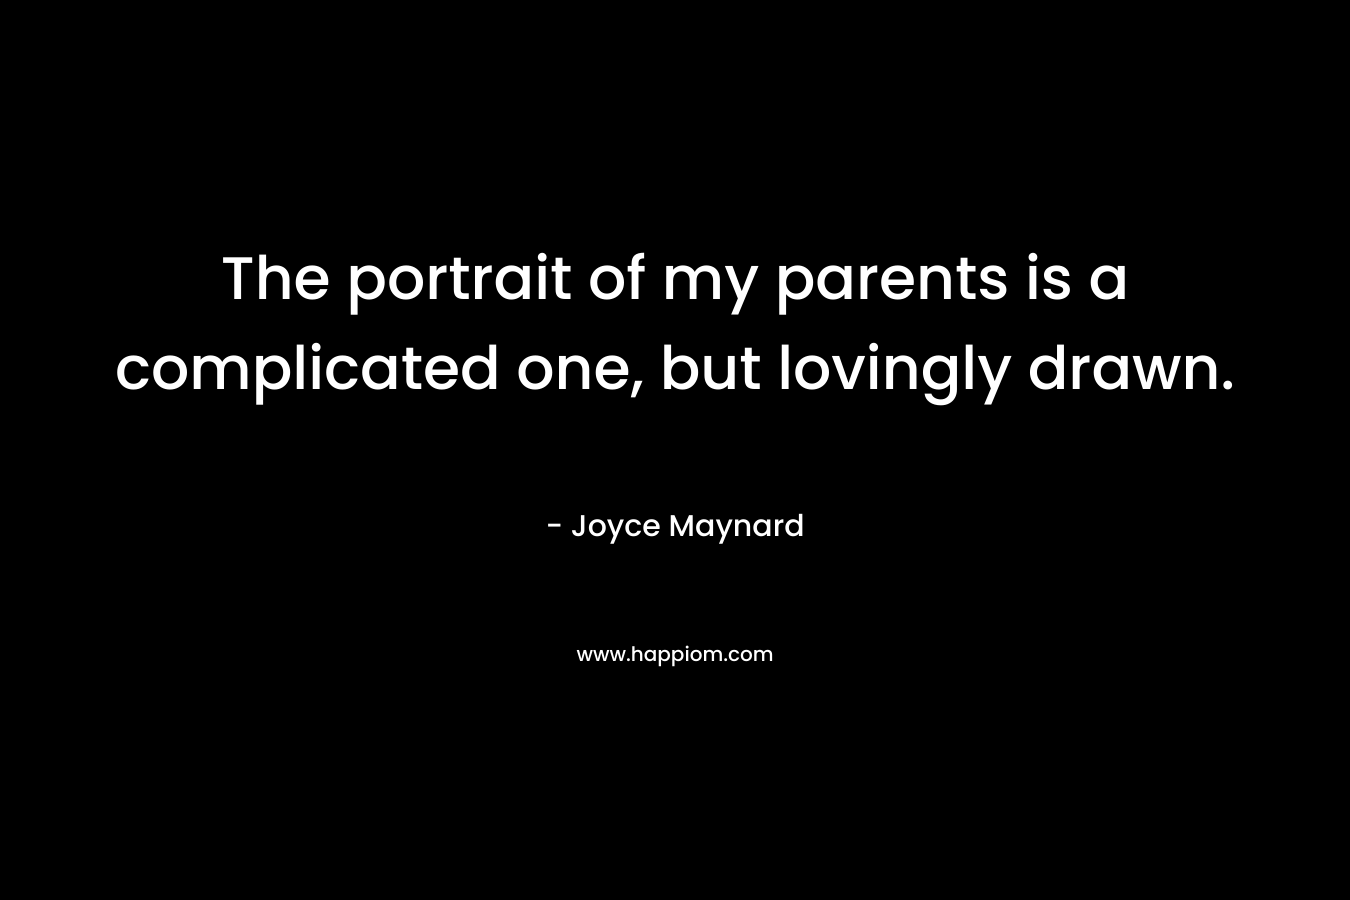 The portrait of my parents is a complicated one, but lovingly drawn. – Joyce Maynard